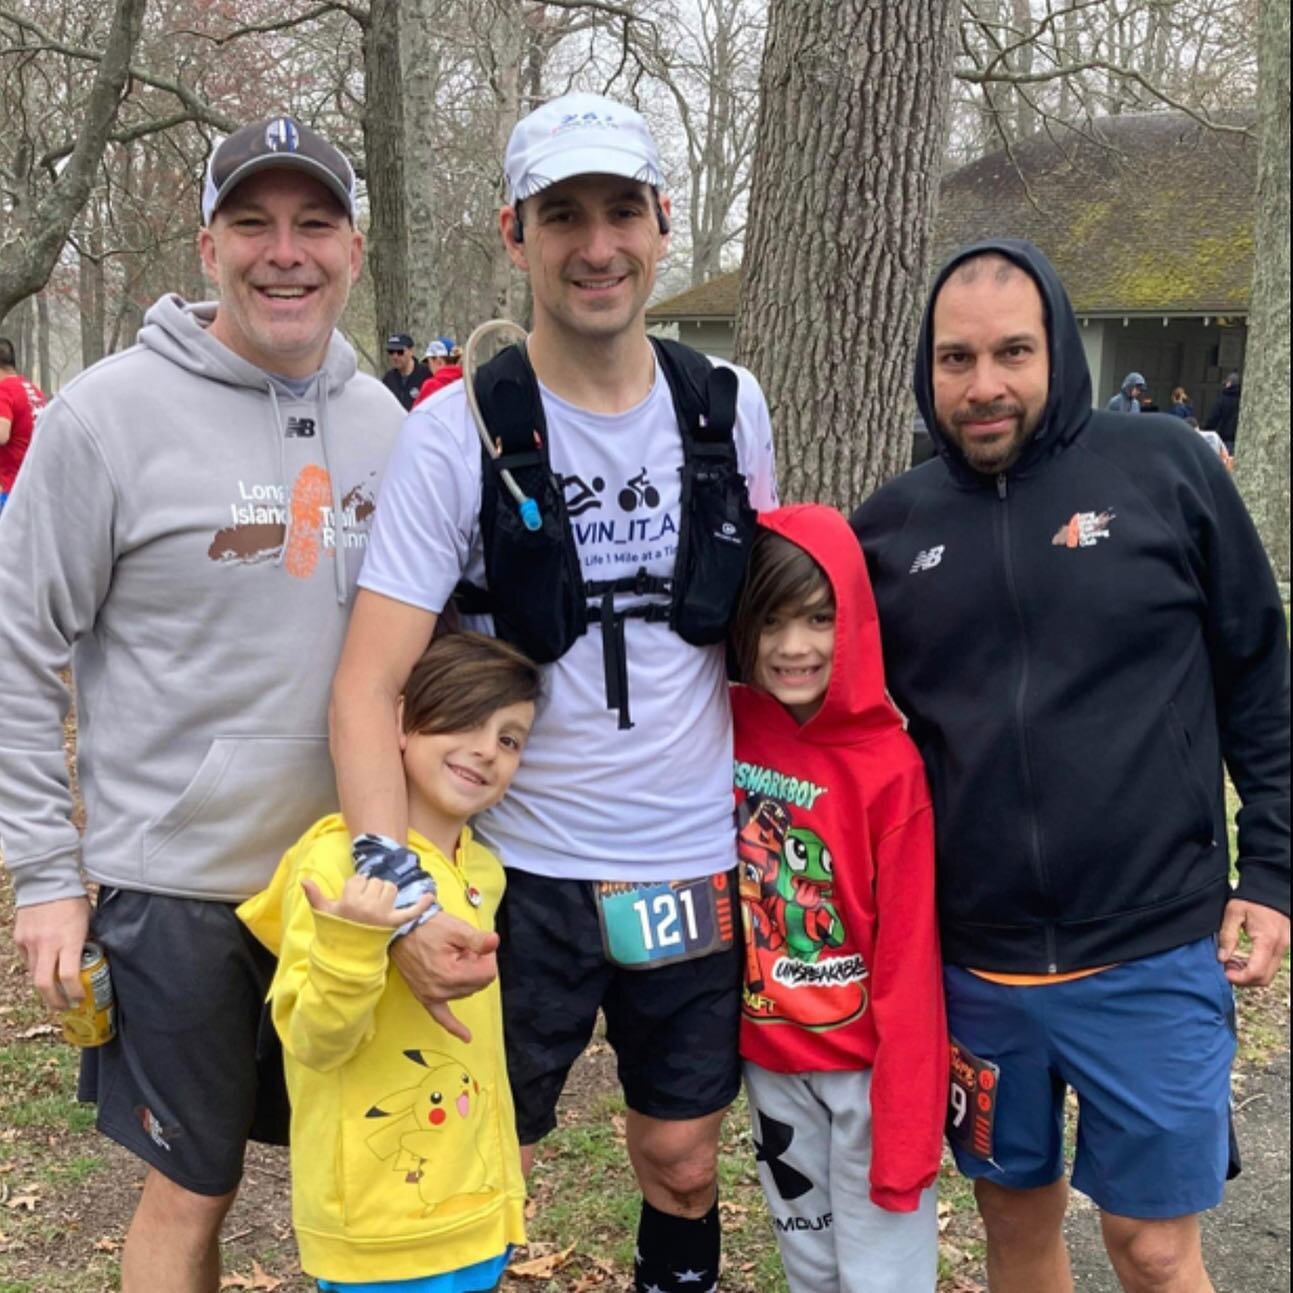 Congratulations to our runners who completed the shore2shore 50K &amp; 25K last weekend hosted by @happilyrunning ! Awesome work to Ken Tymecki, Anthony Trama &amp; Ellen for crushing the 50k &amp; to Brian Sullivan &amp; Eric Bernstein for zipping t